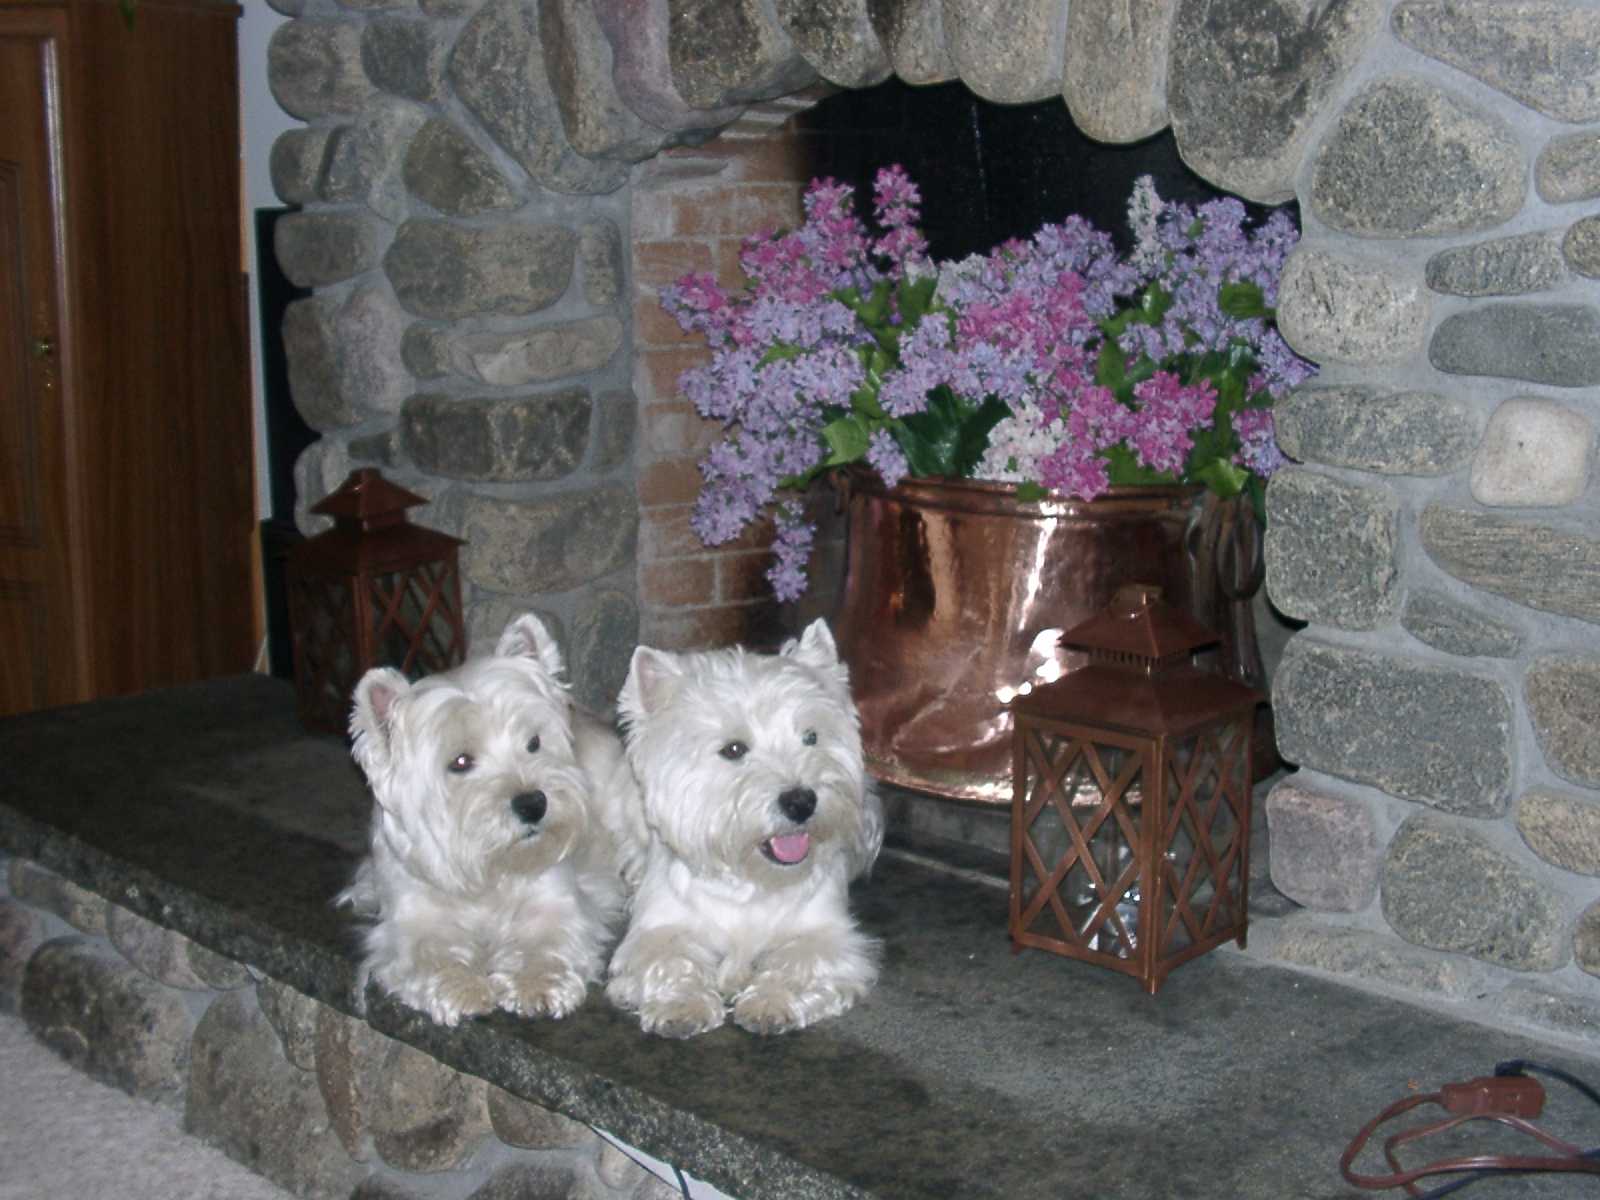 Two white dogs sitting on a stone fireplace.